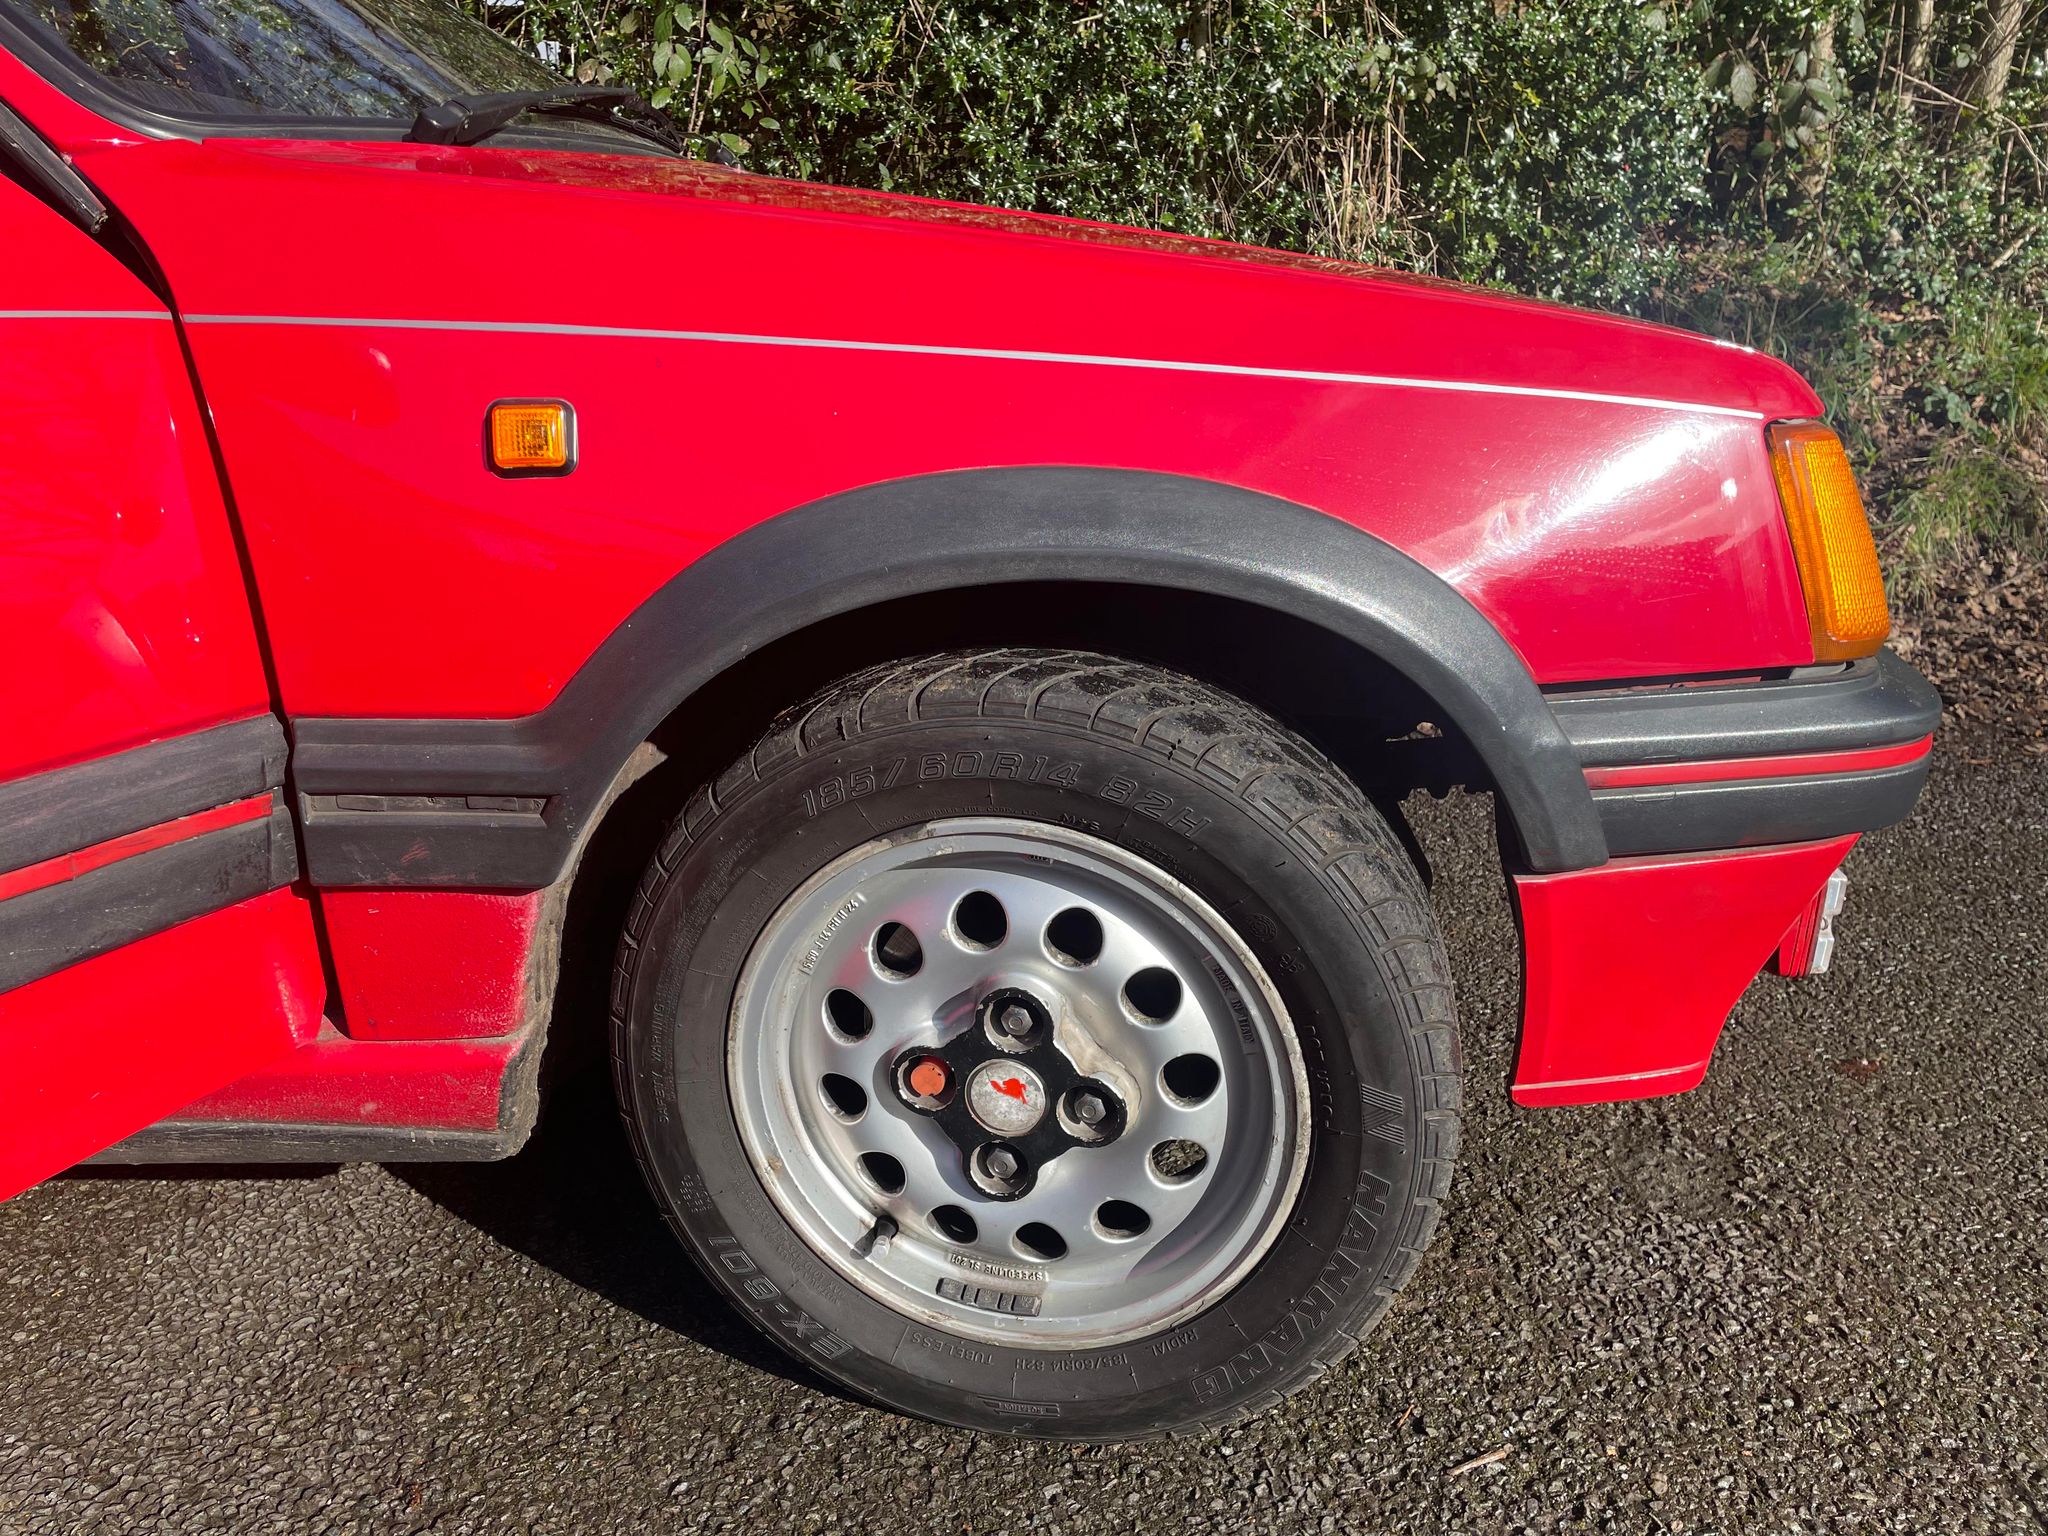 Peugeot 205 Cti 1.6 convertible - Mot'd 83,000 miles This stunning low mileage car has been - Image 11 of 18